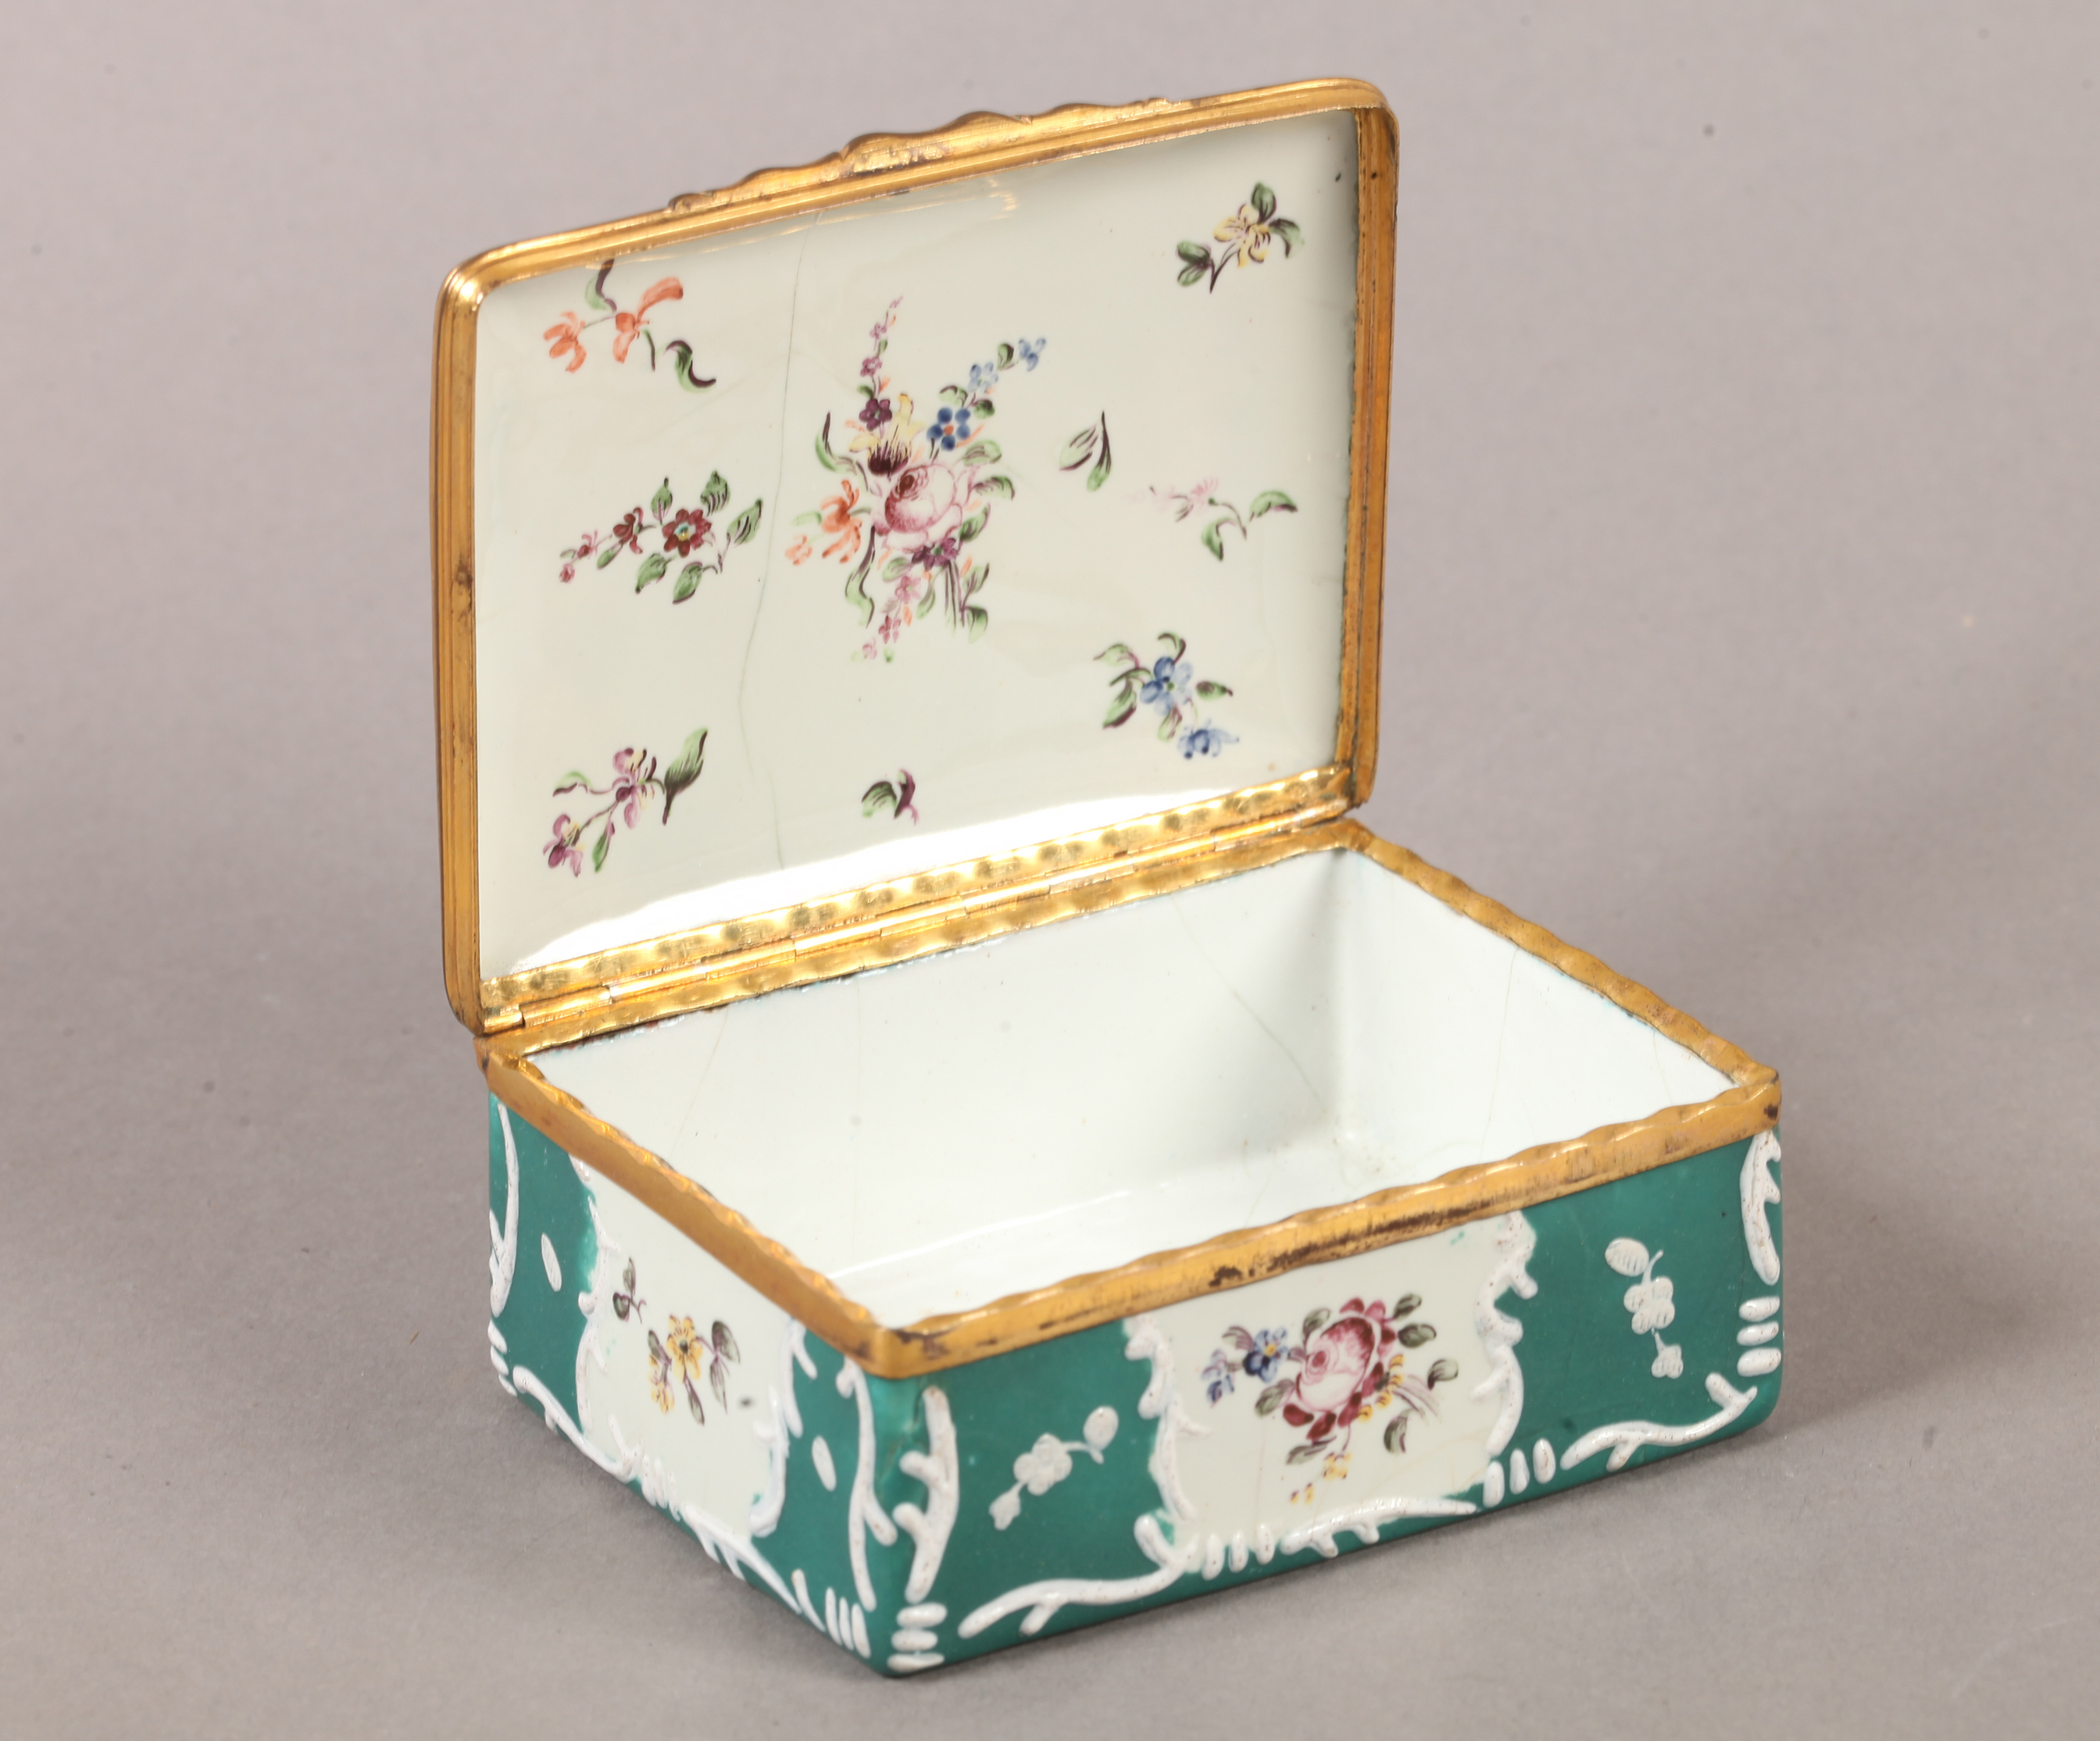 A 19TH CENTURY GERMAN ENAMEL BOX, rectangular, the cover and sides painted with delicate floral - Image 3 of 4